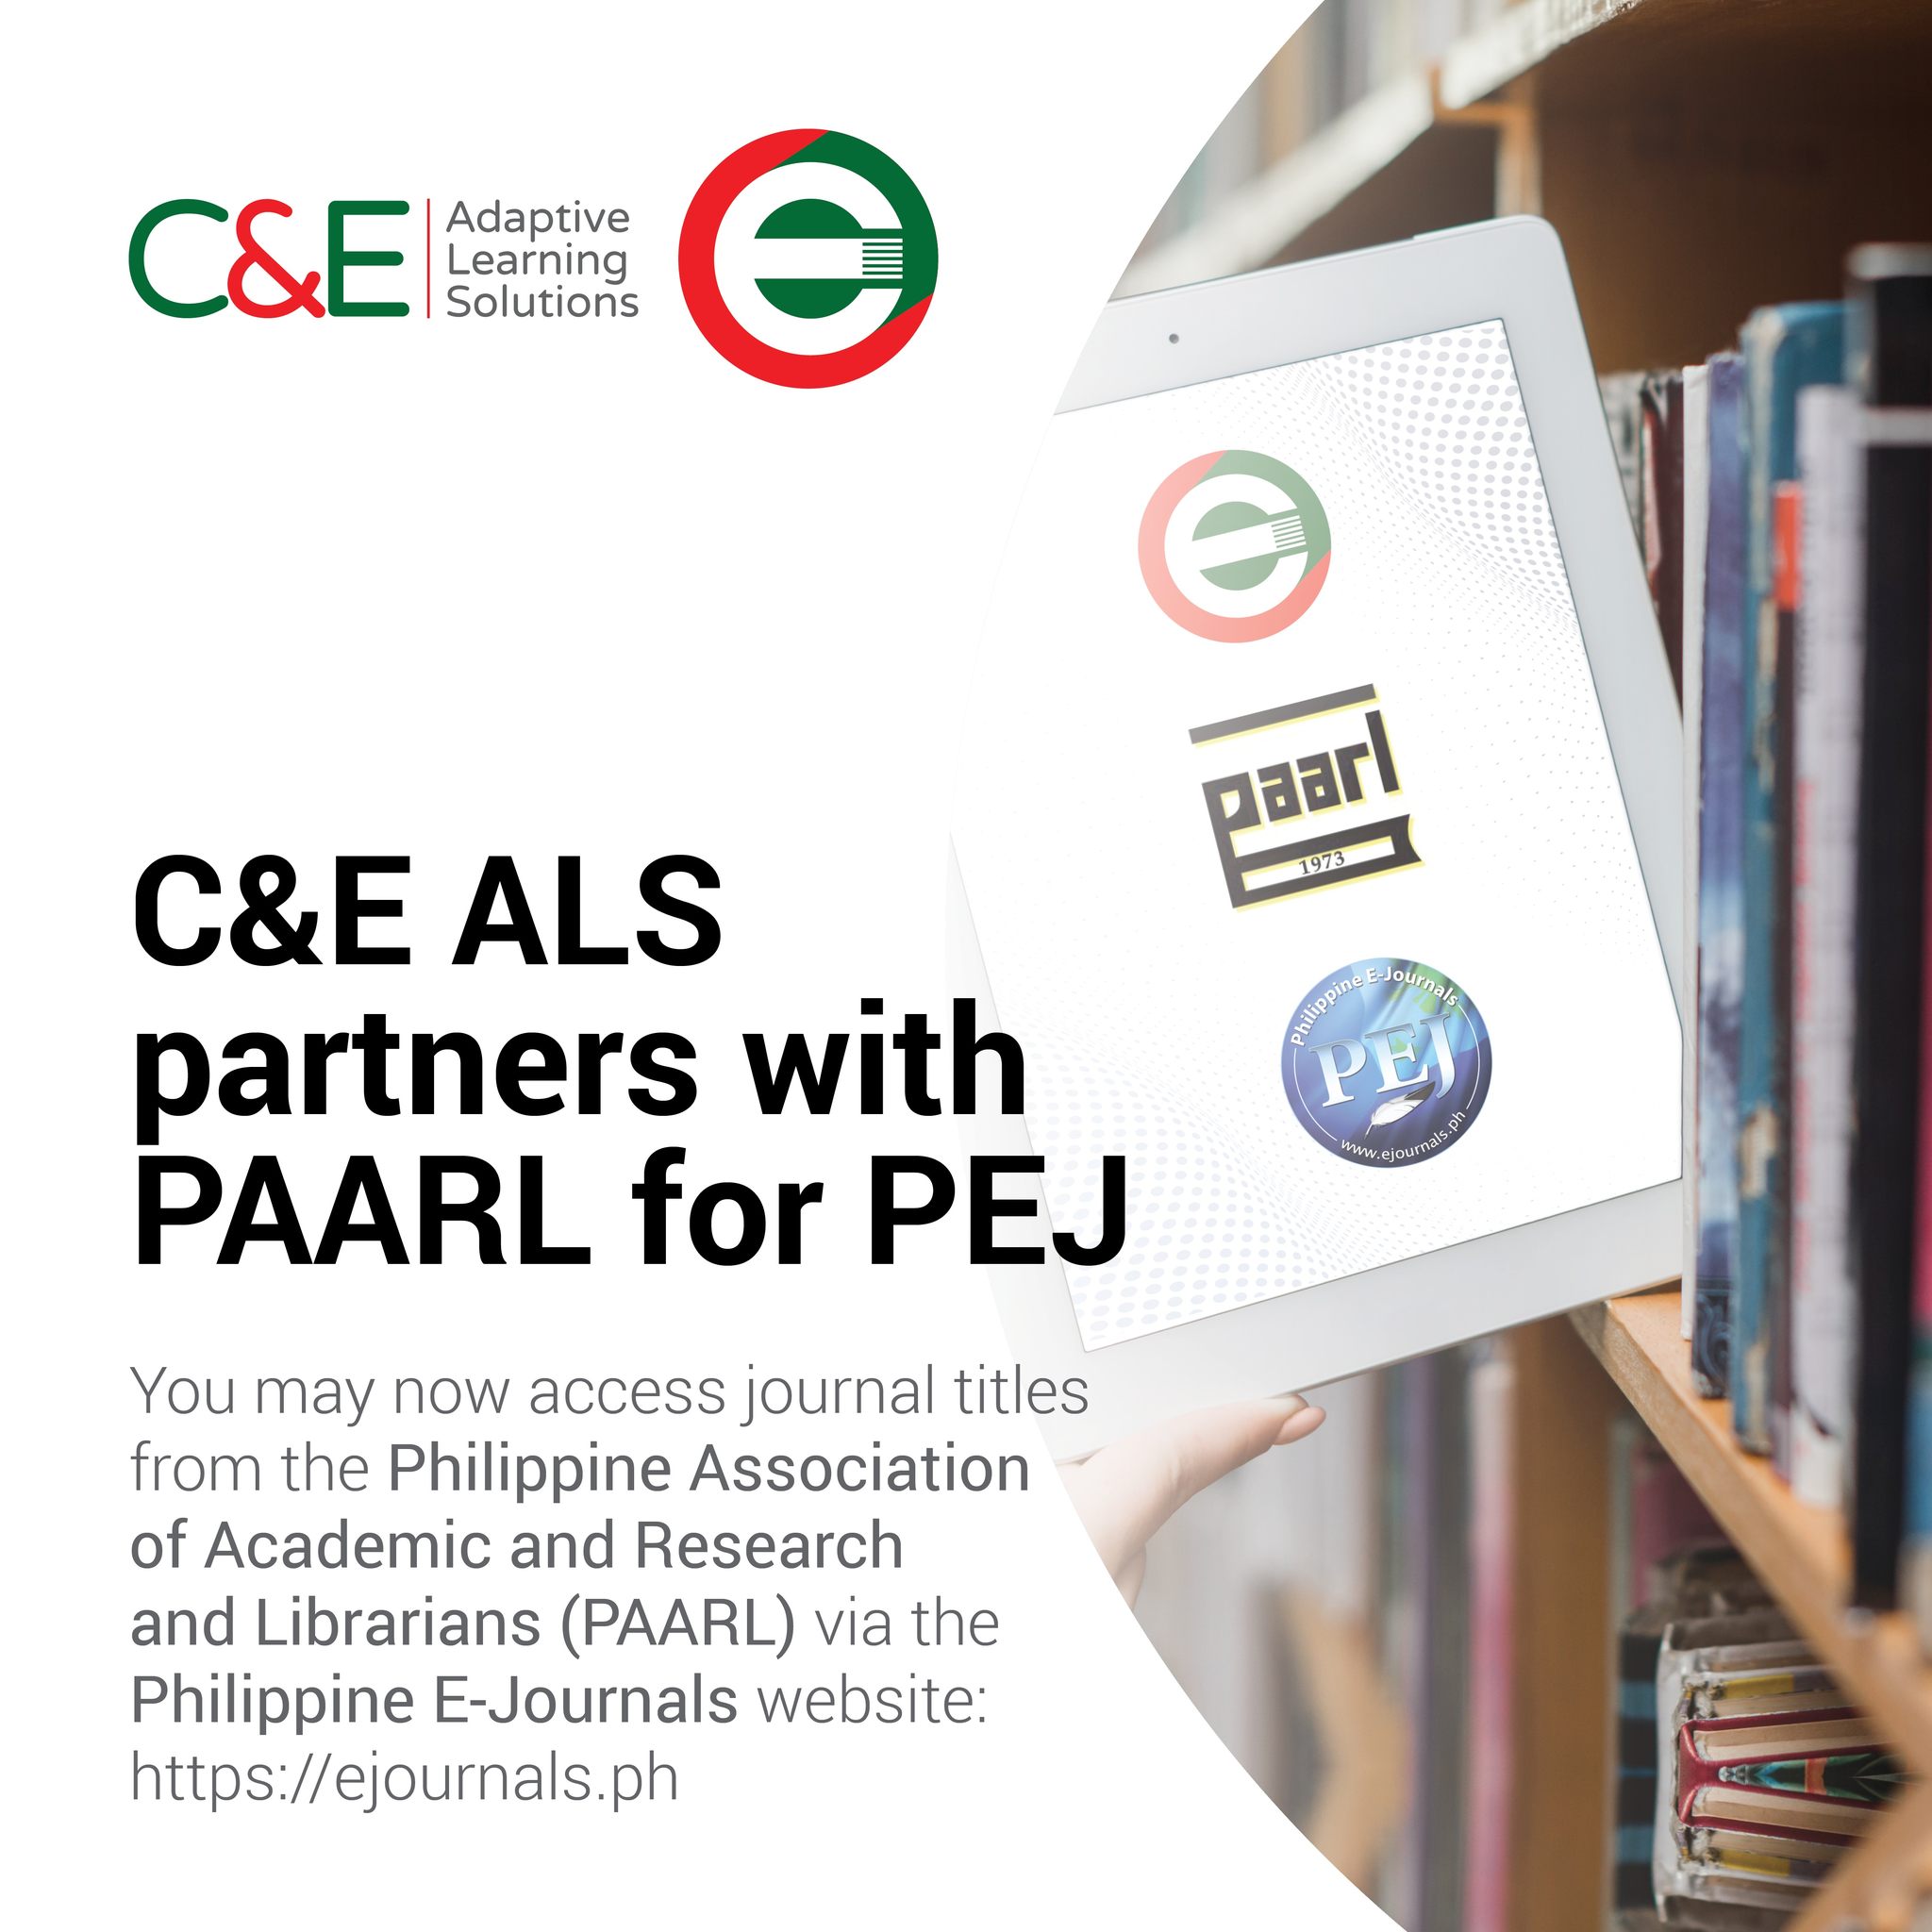 PAARL Research Journal now accessible in Philippine E-Journals